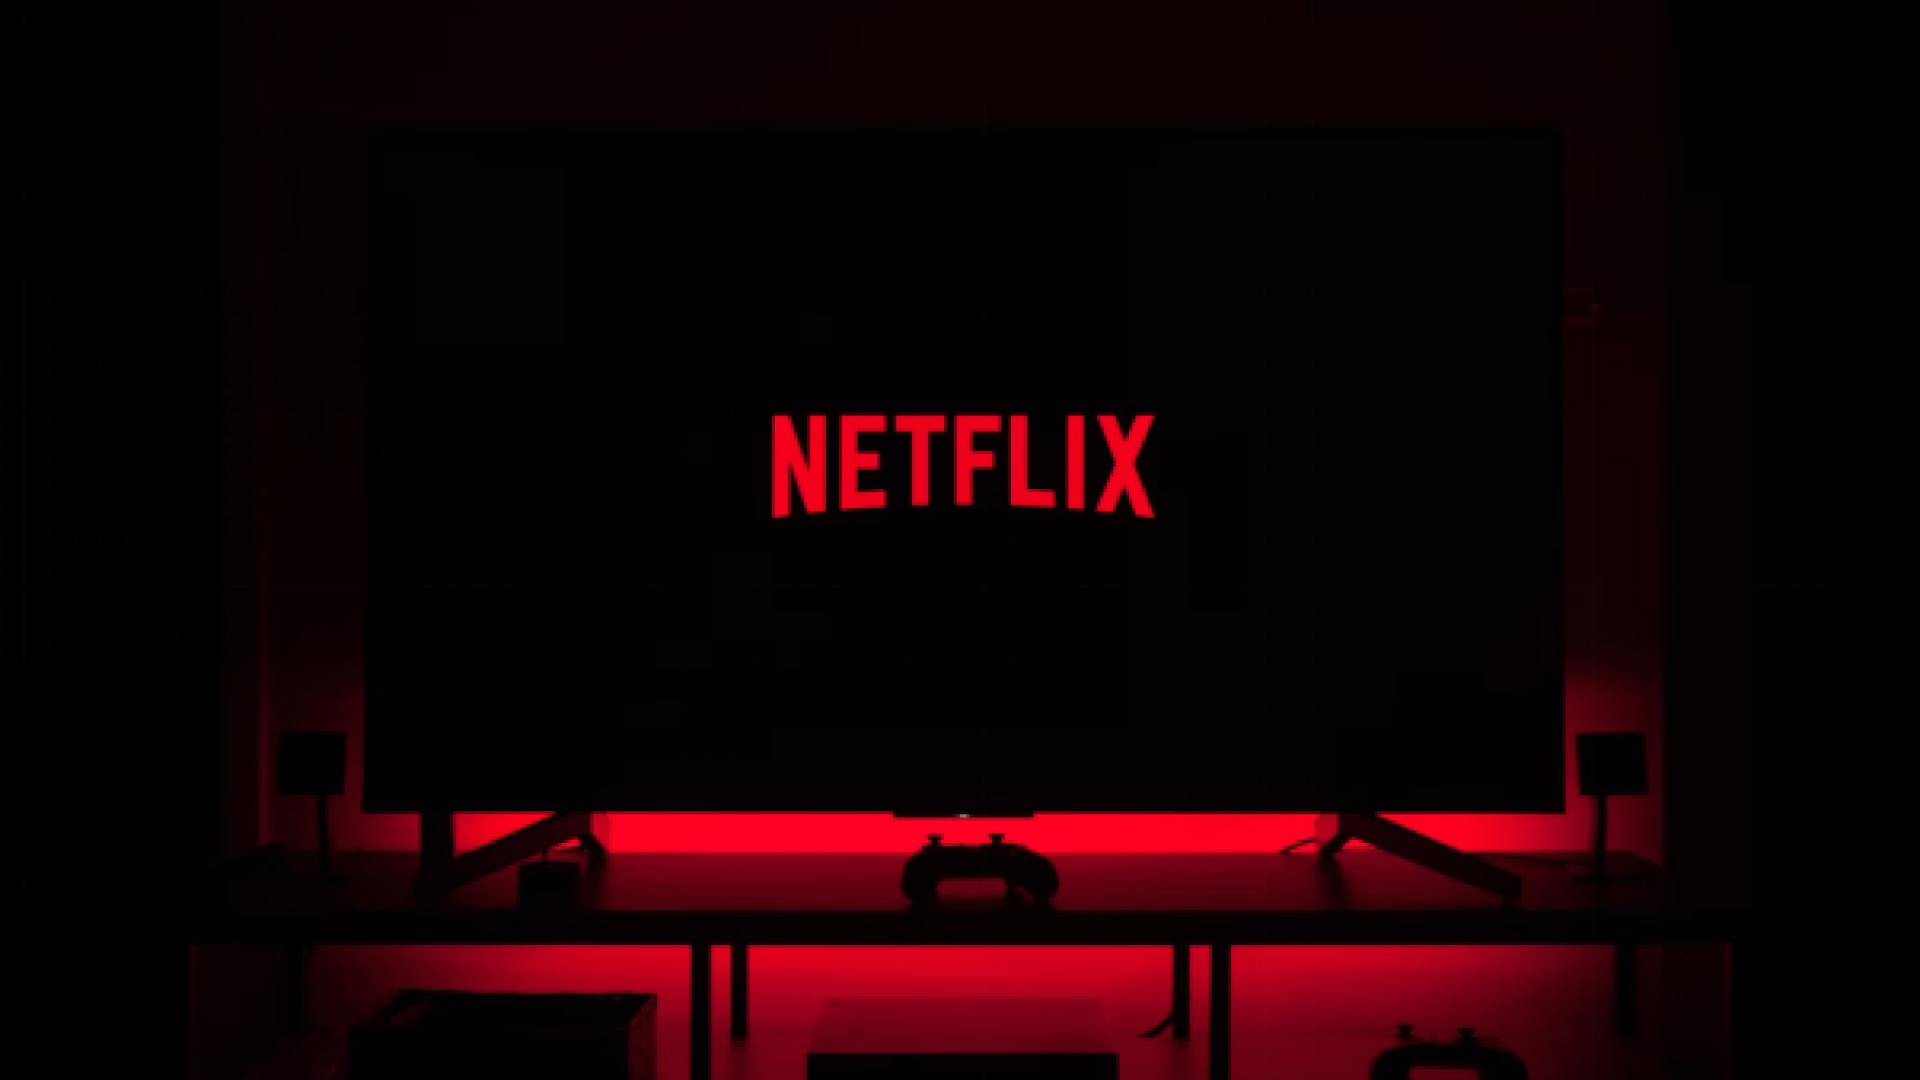 A Full Overview of Beef Netflix